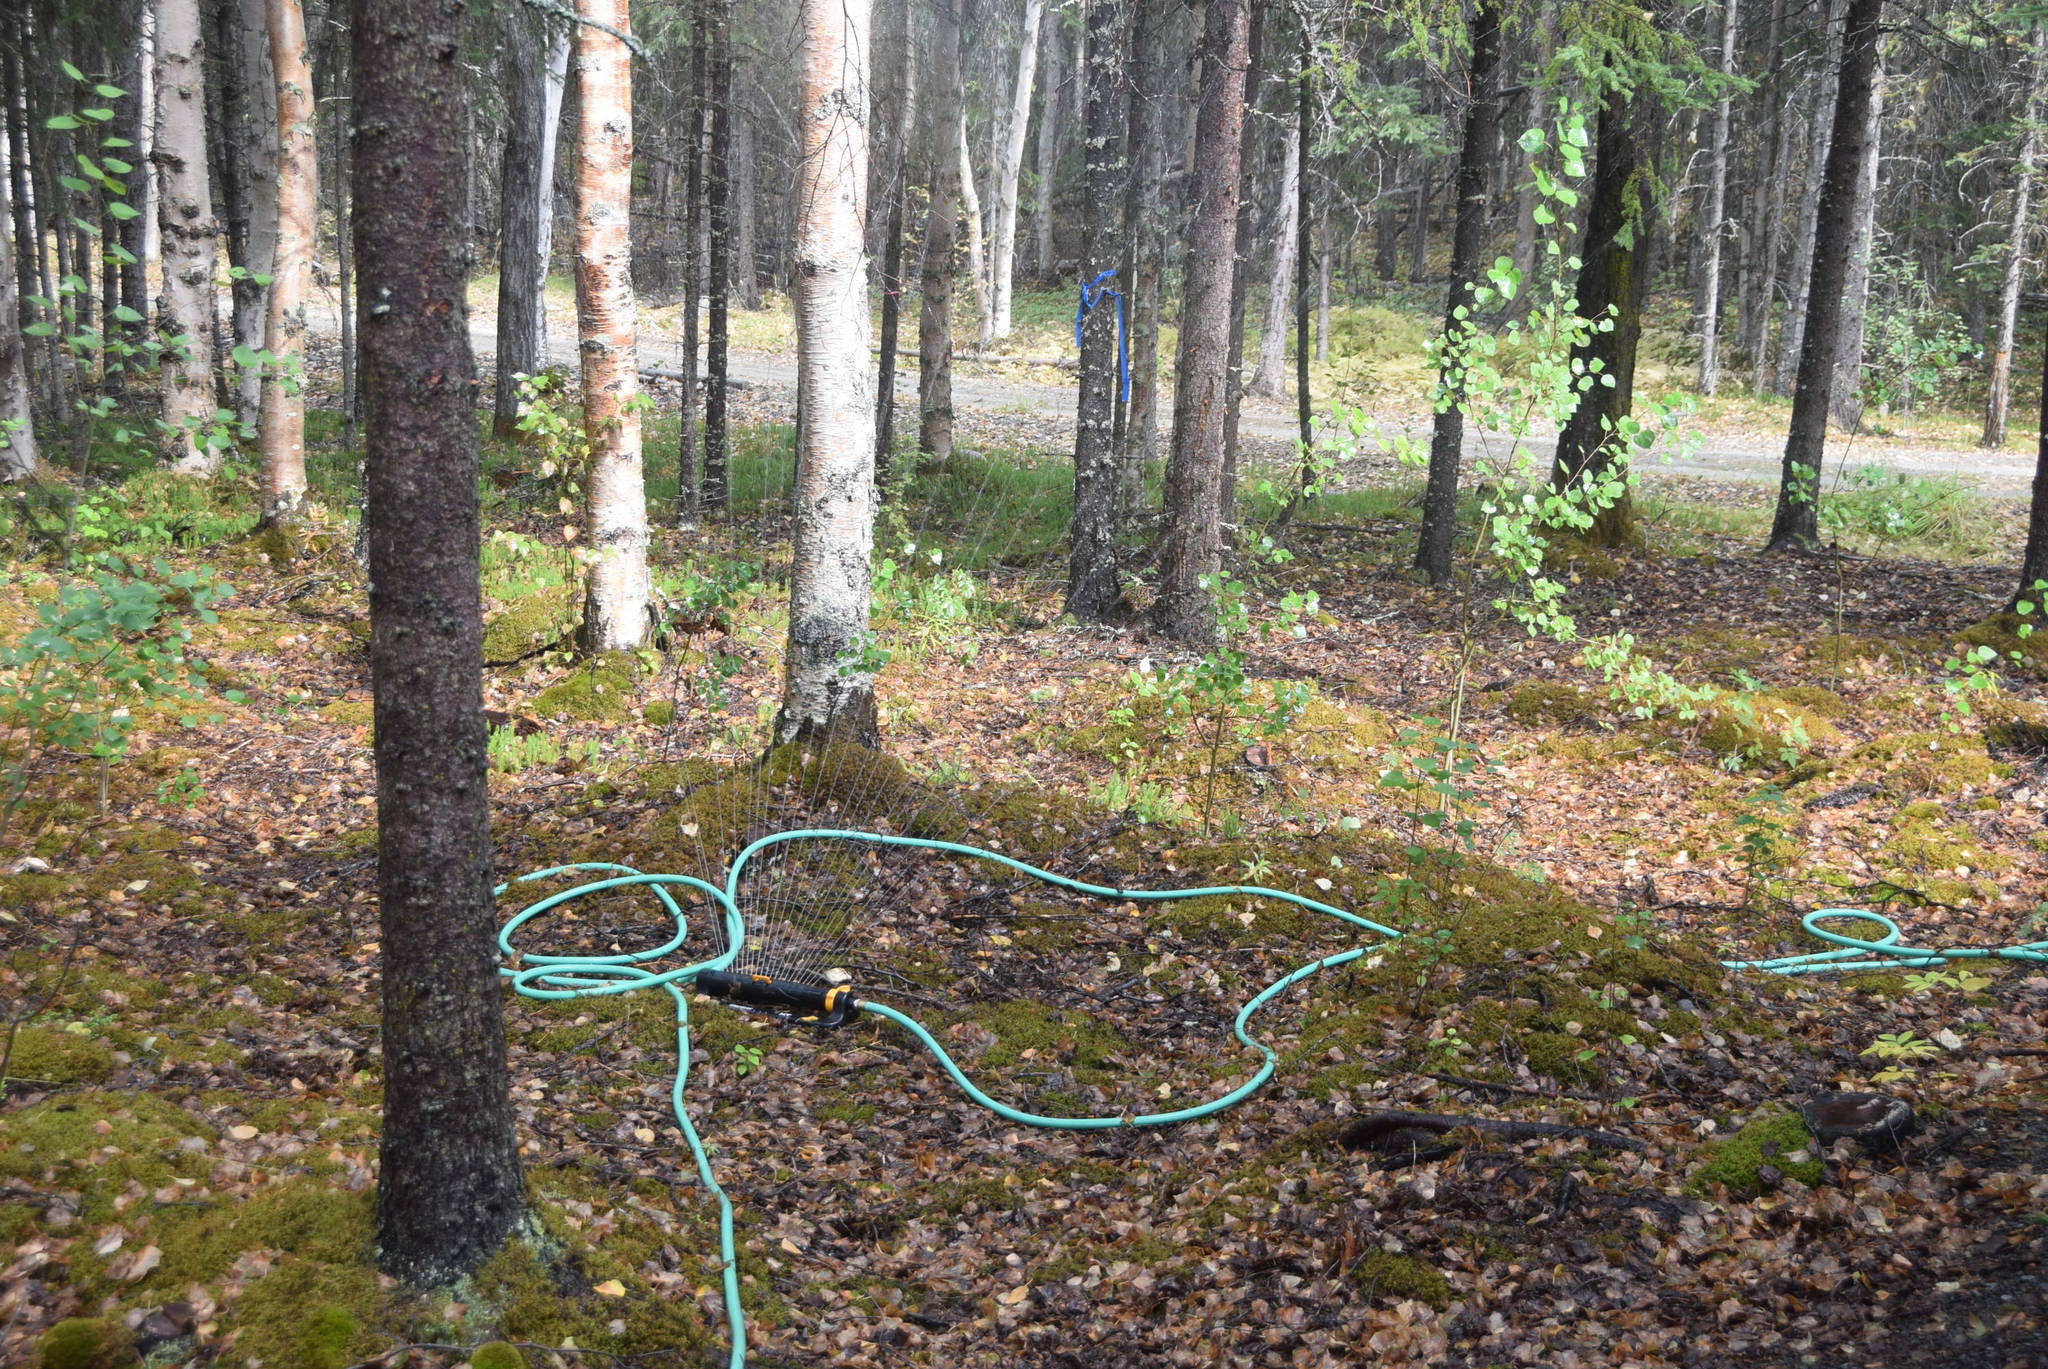 A sprinkler system set up for structure protection can be seen here at the home of Michael Link in Cooper Landing, Alaska on Aug. 30, 2019. (Photo by Brian Mazurek/Peninsula Clarion)                                A sprinkler system set up for structure protection can be seen here at the home of Michael Link in Cooper Landing, Alaska on Aug. 30, 2019. (Photo by Brian Mazurek/Peninsula Clarion)